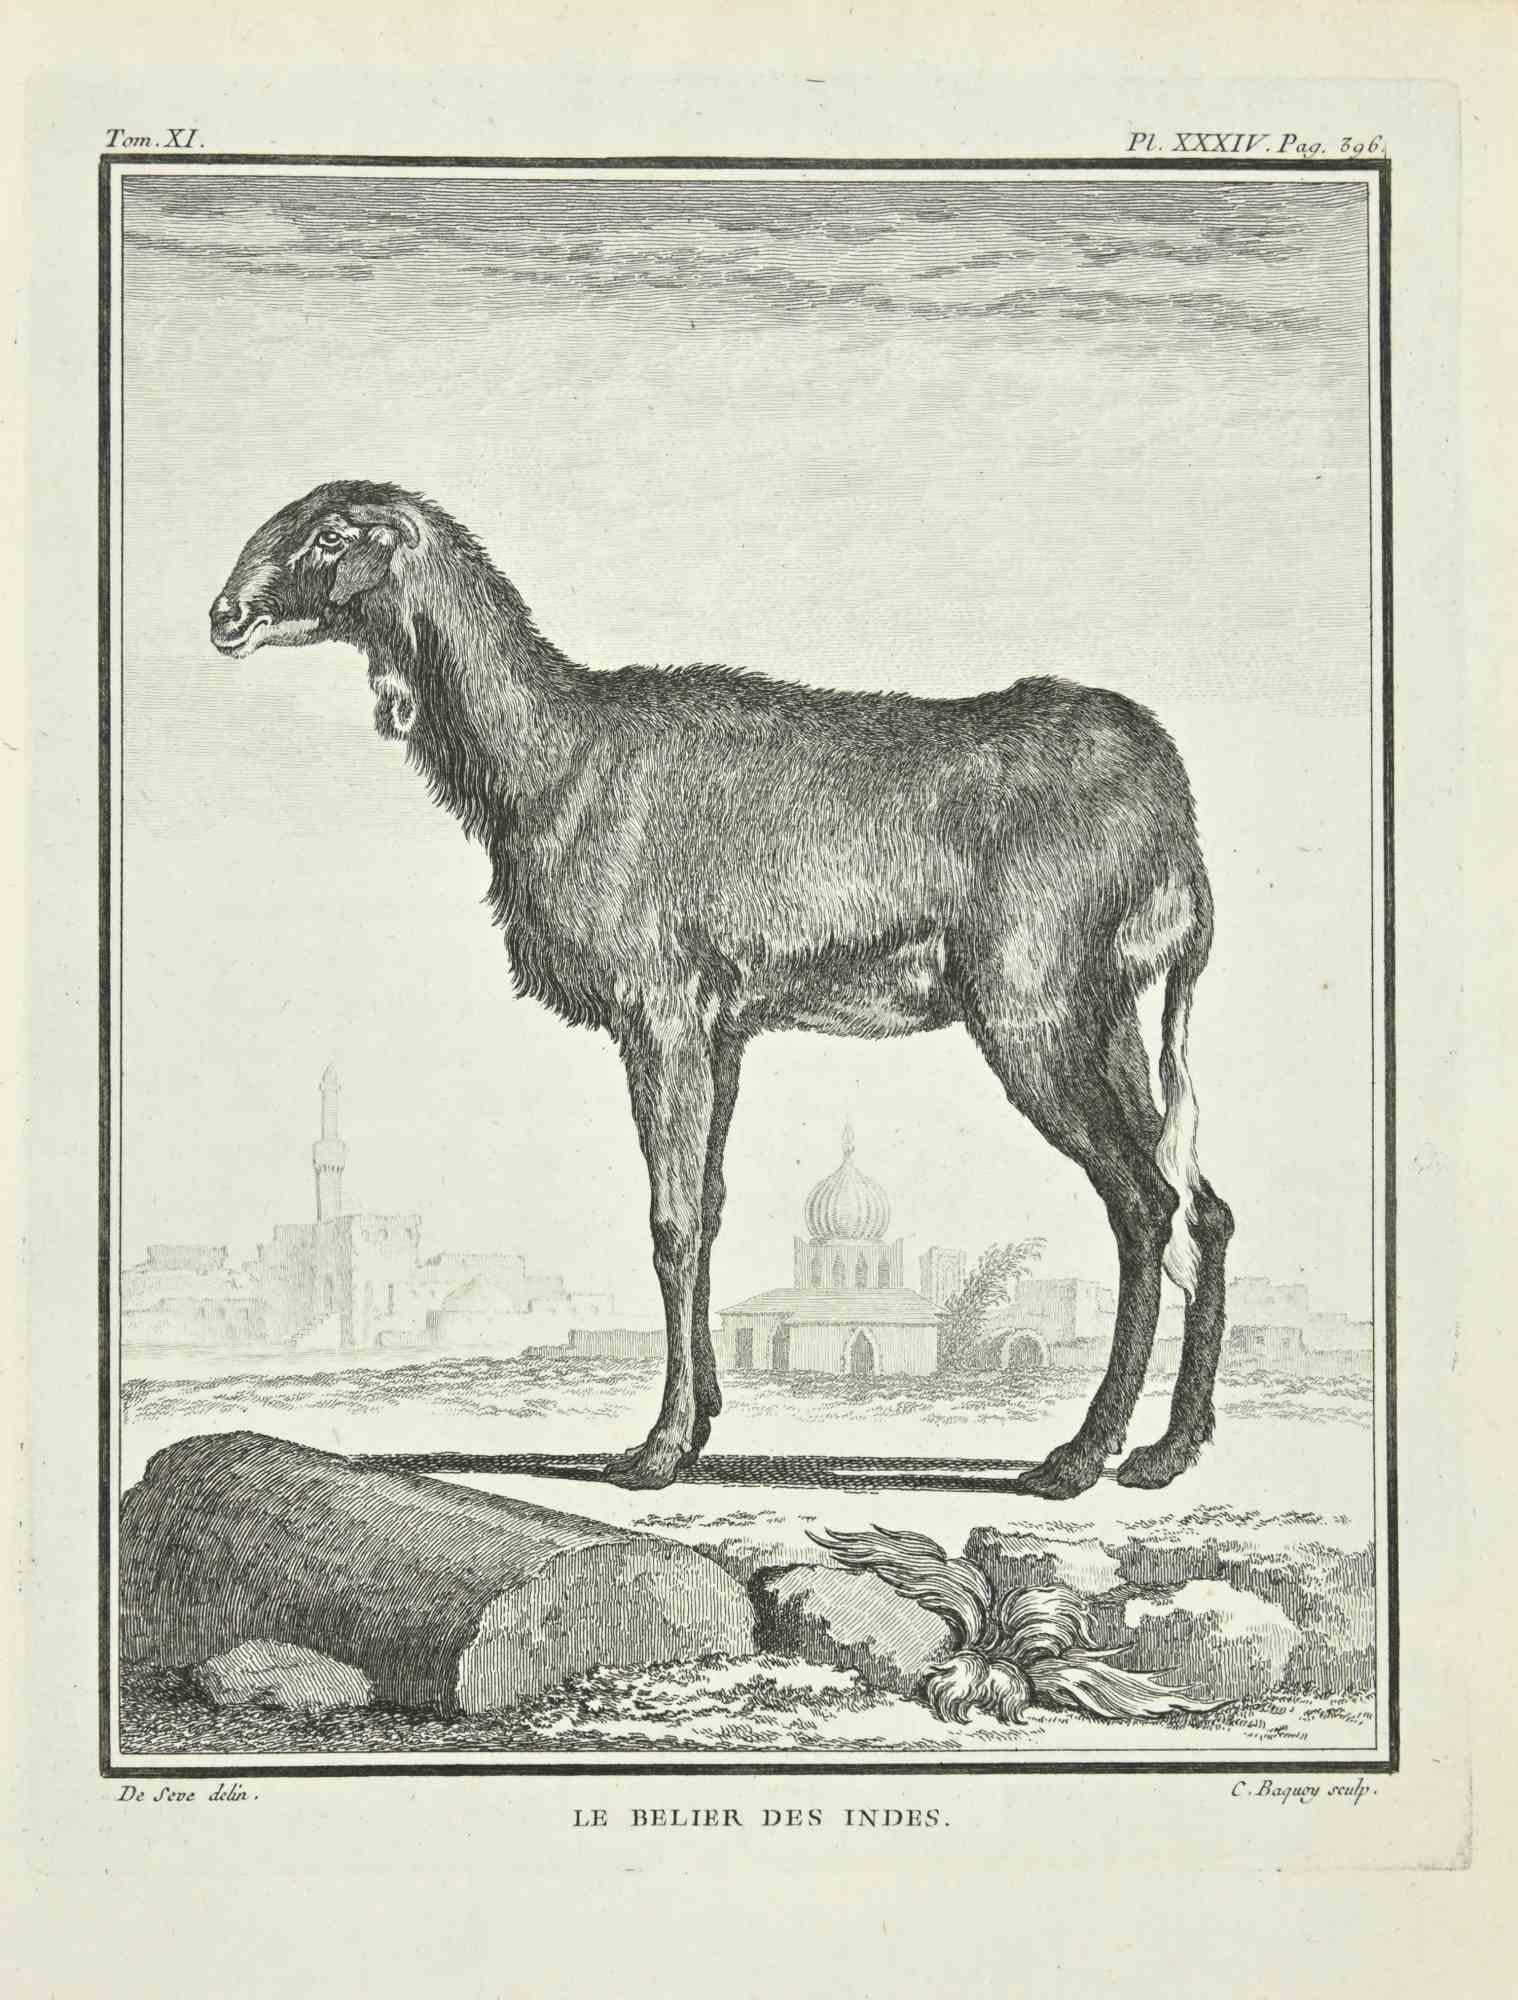 Le Belier is an etching realized by Jean Charles Baquoy in 1771.

It belongs to the suite "Histoire Naturelle de Buffon".

The Artist's signature is engraved lower right.

Good conditions.